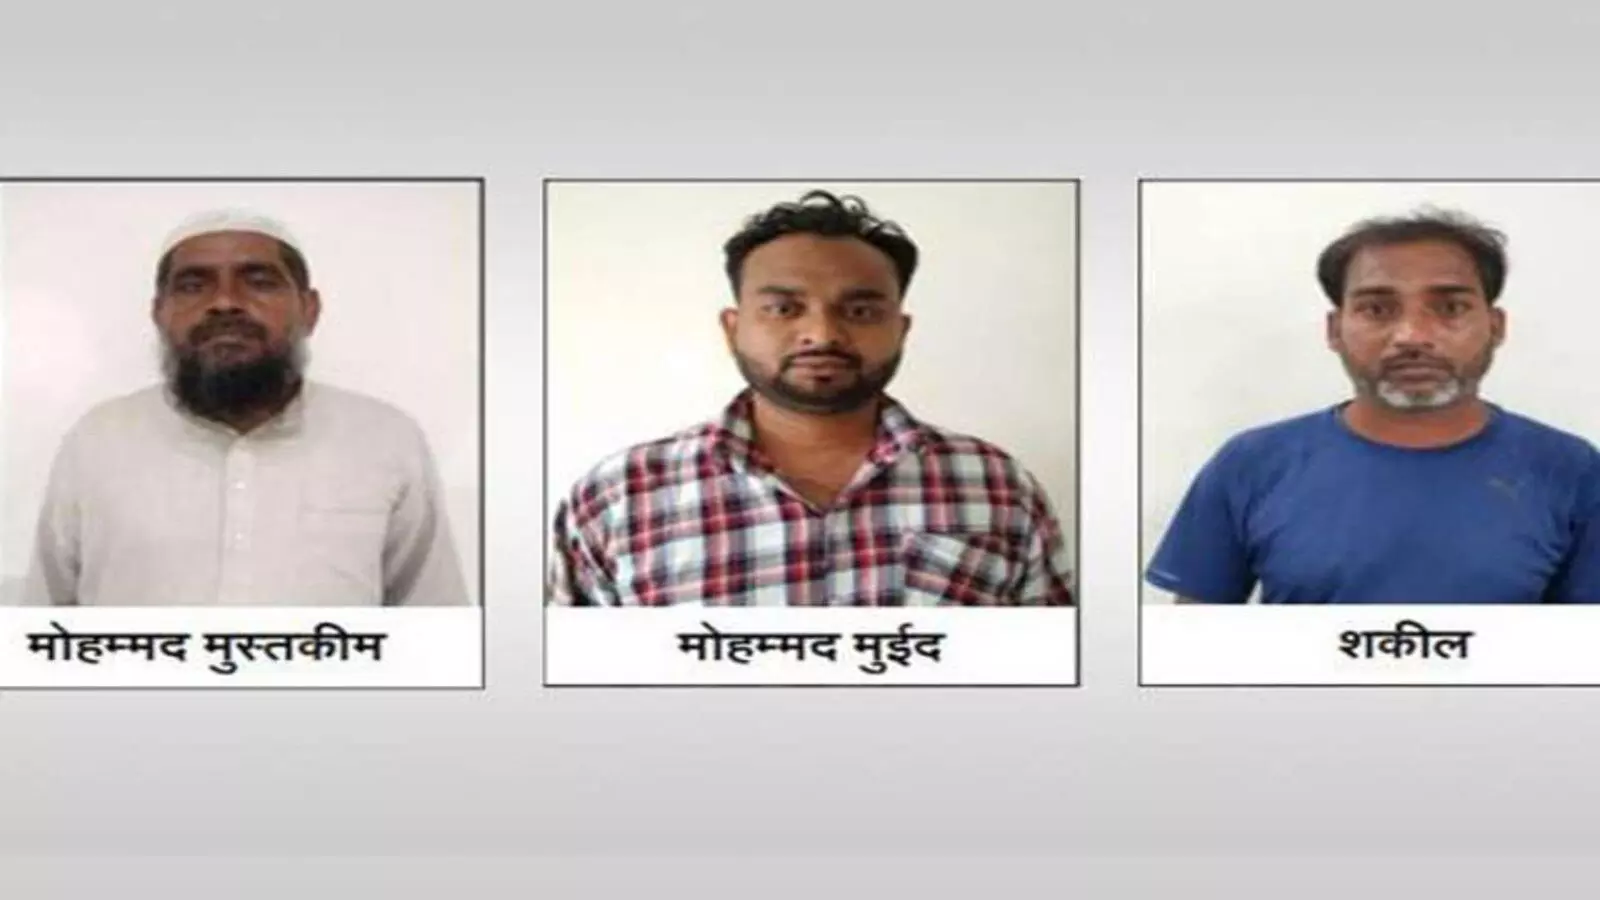 3 more terrorists of Al-Qaeda Outfit Arrested in UP